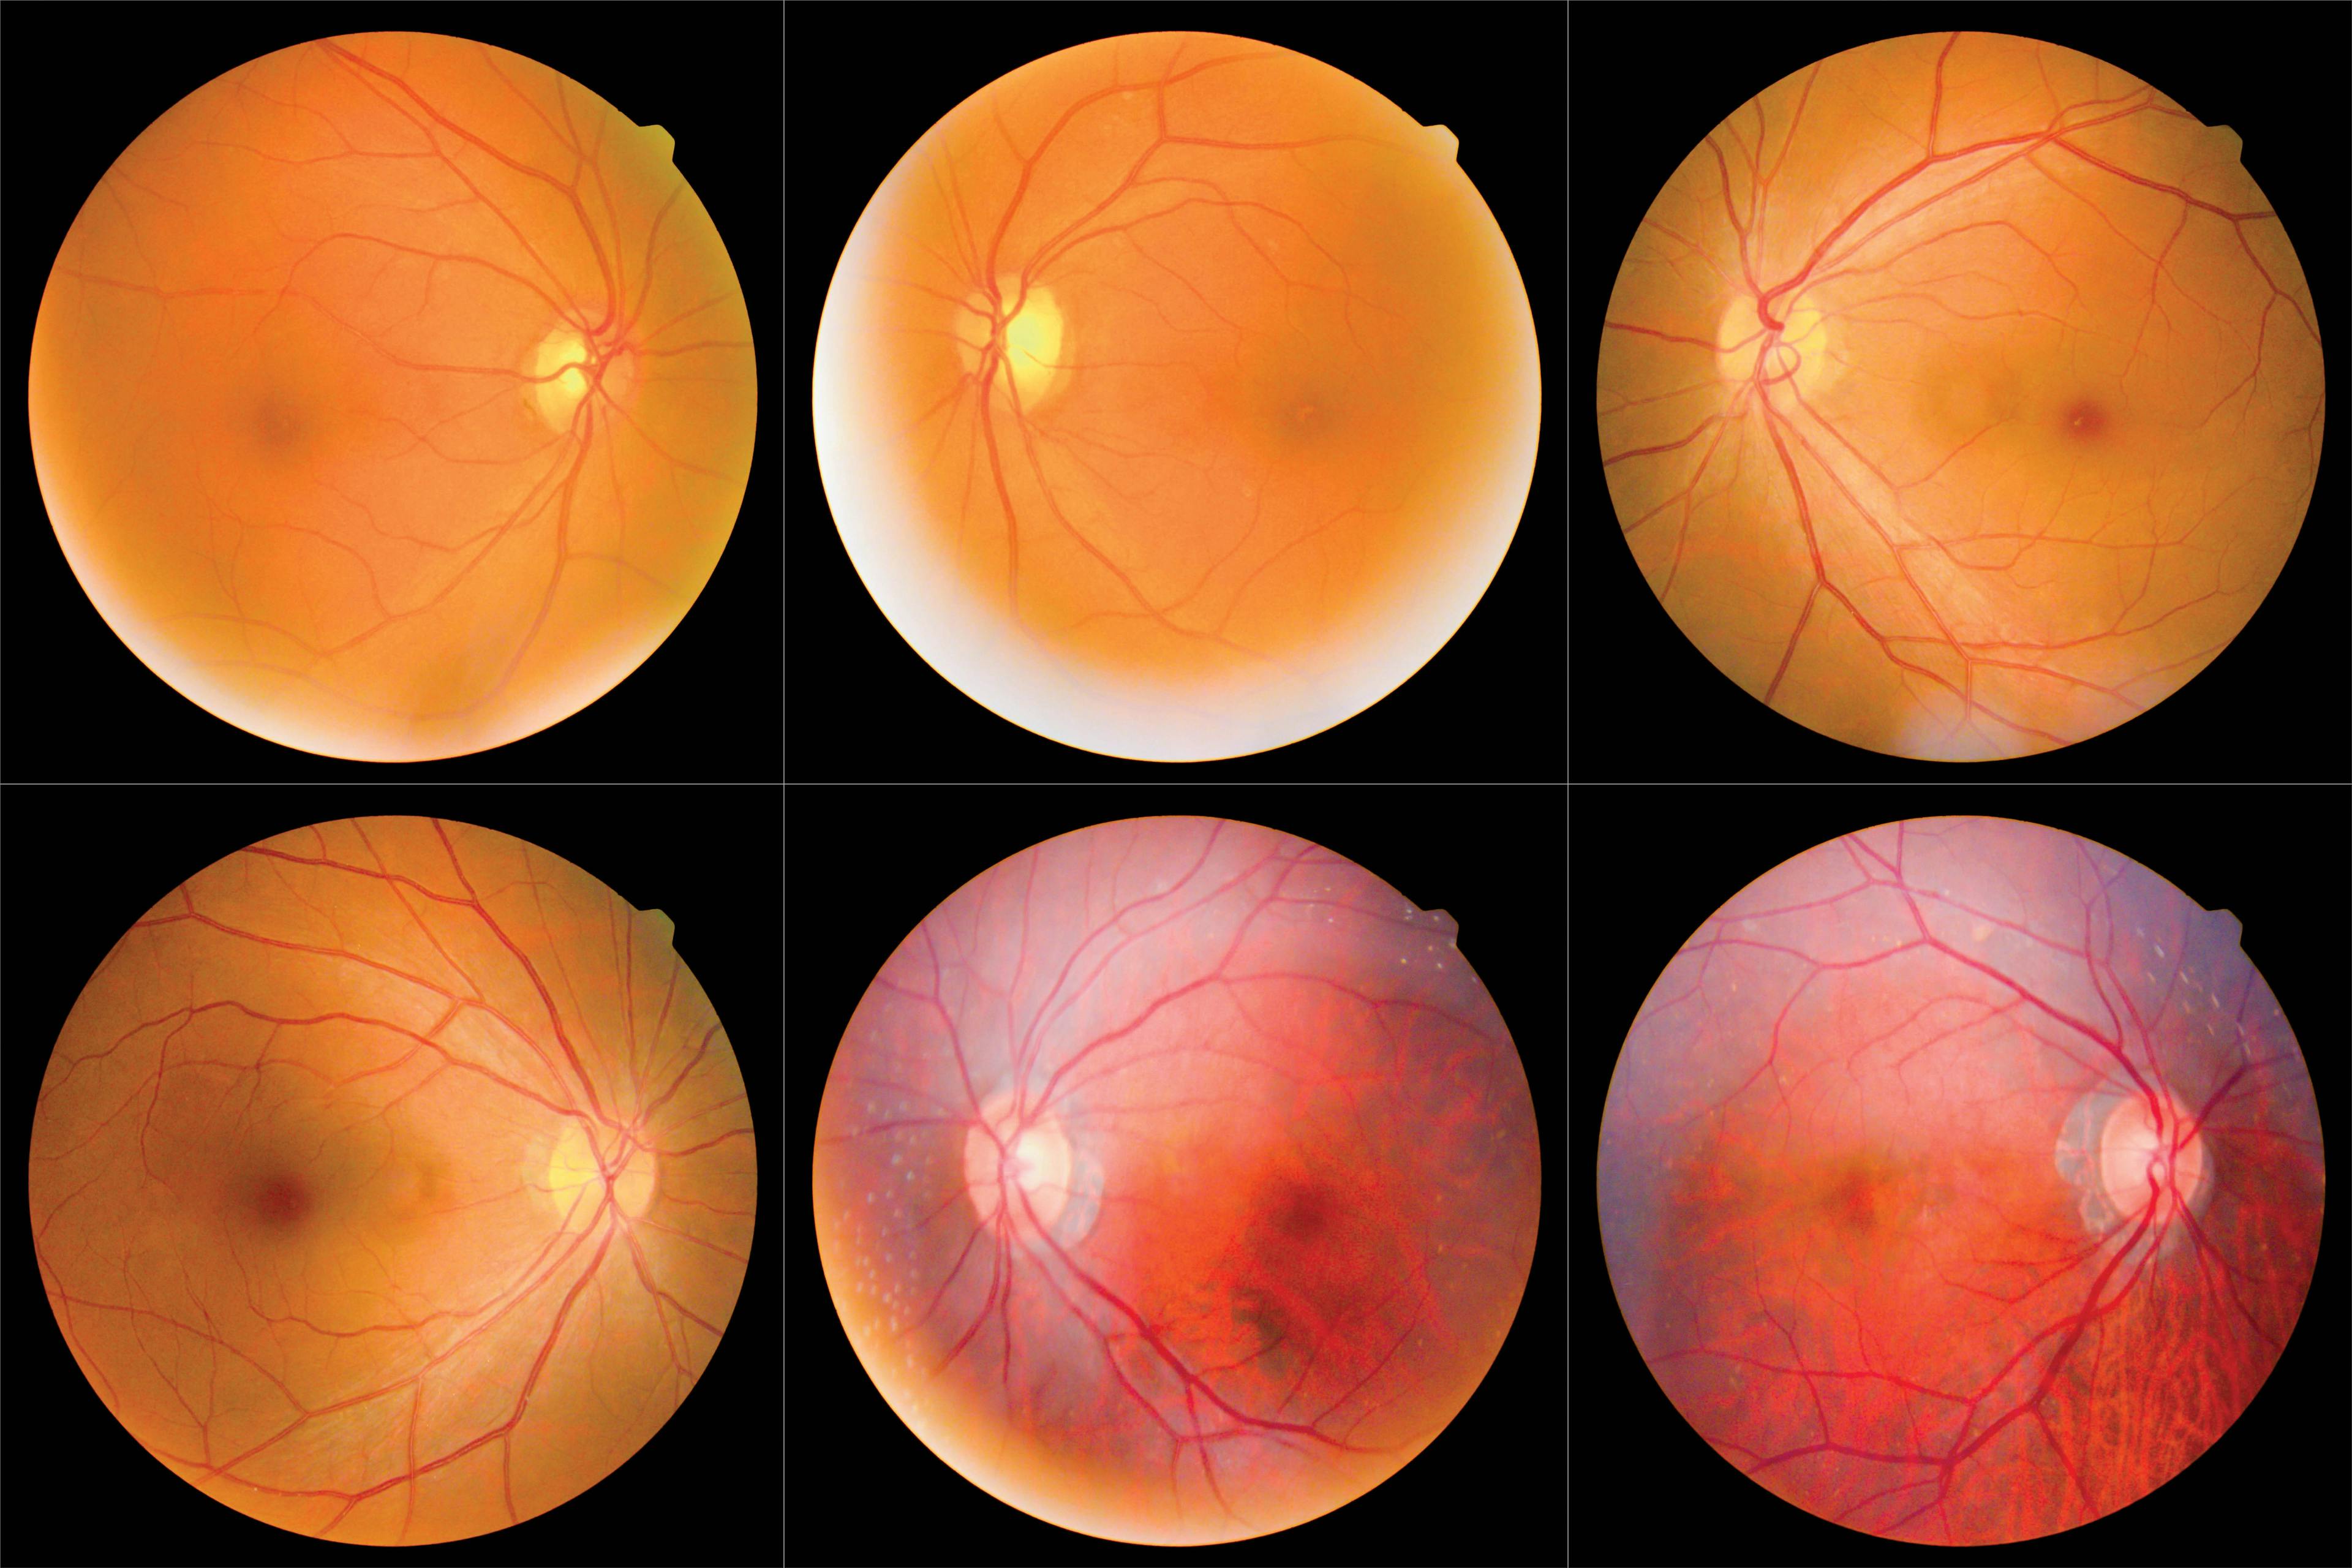 Casting a new light on fundus imaging